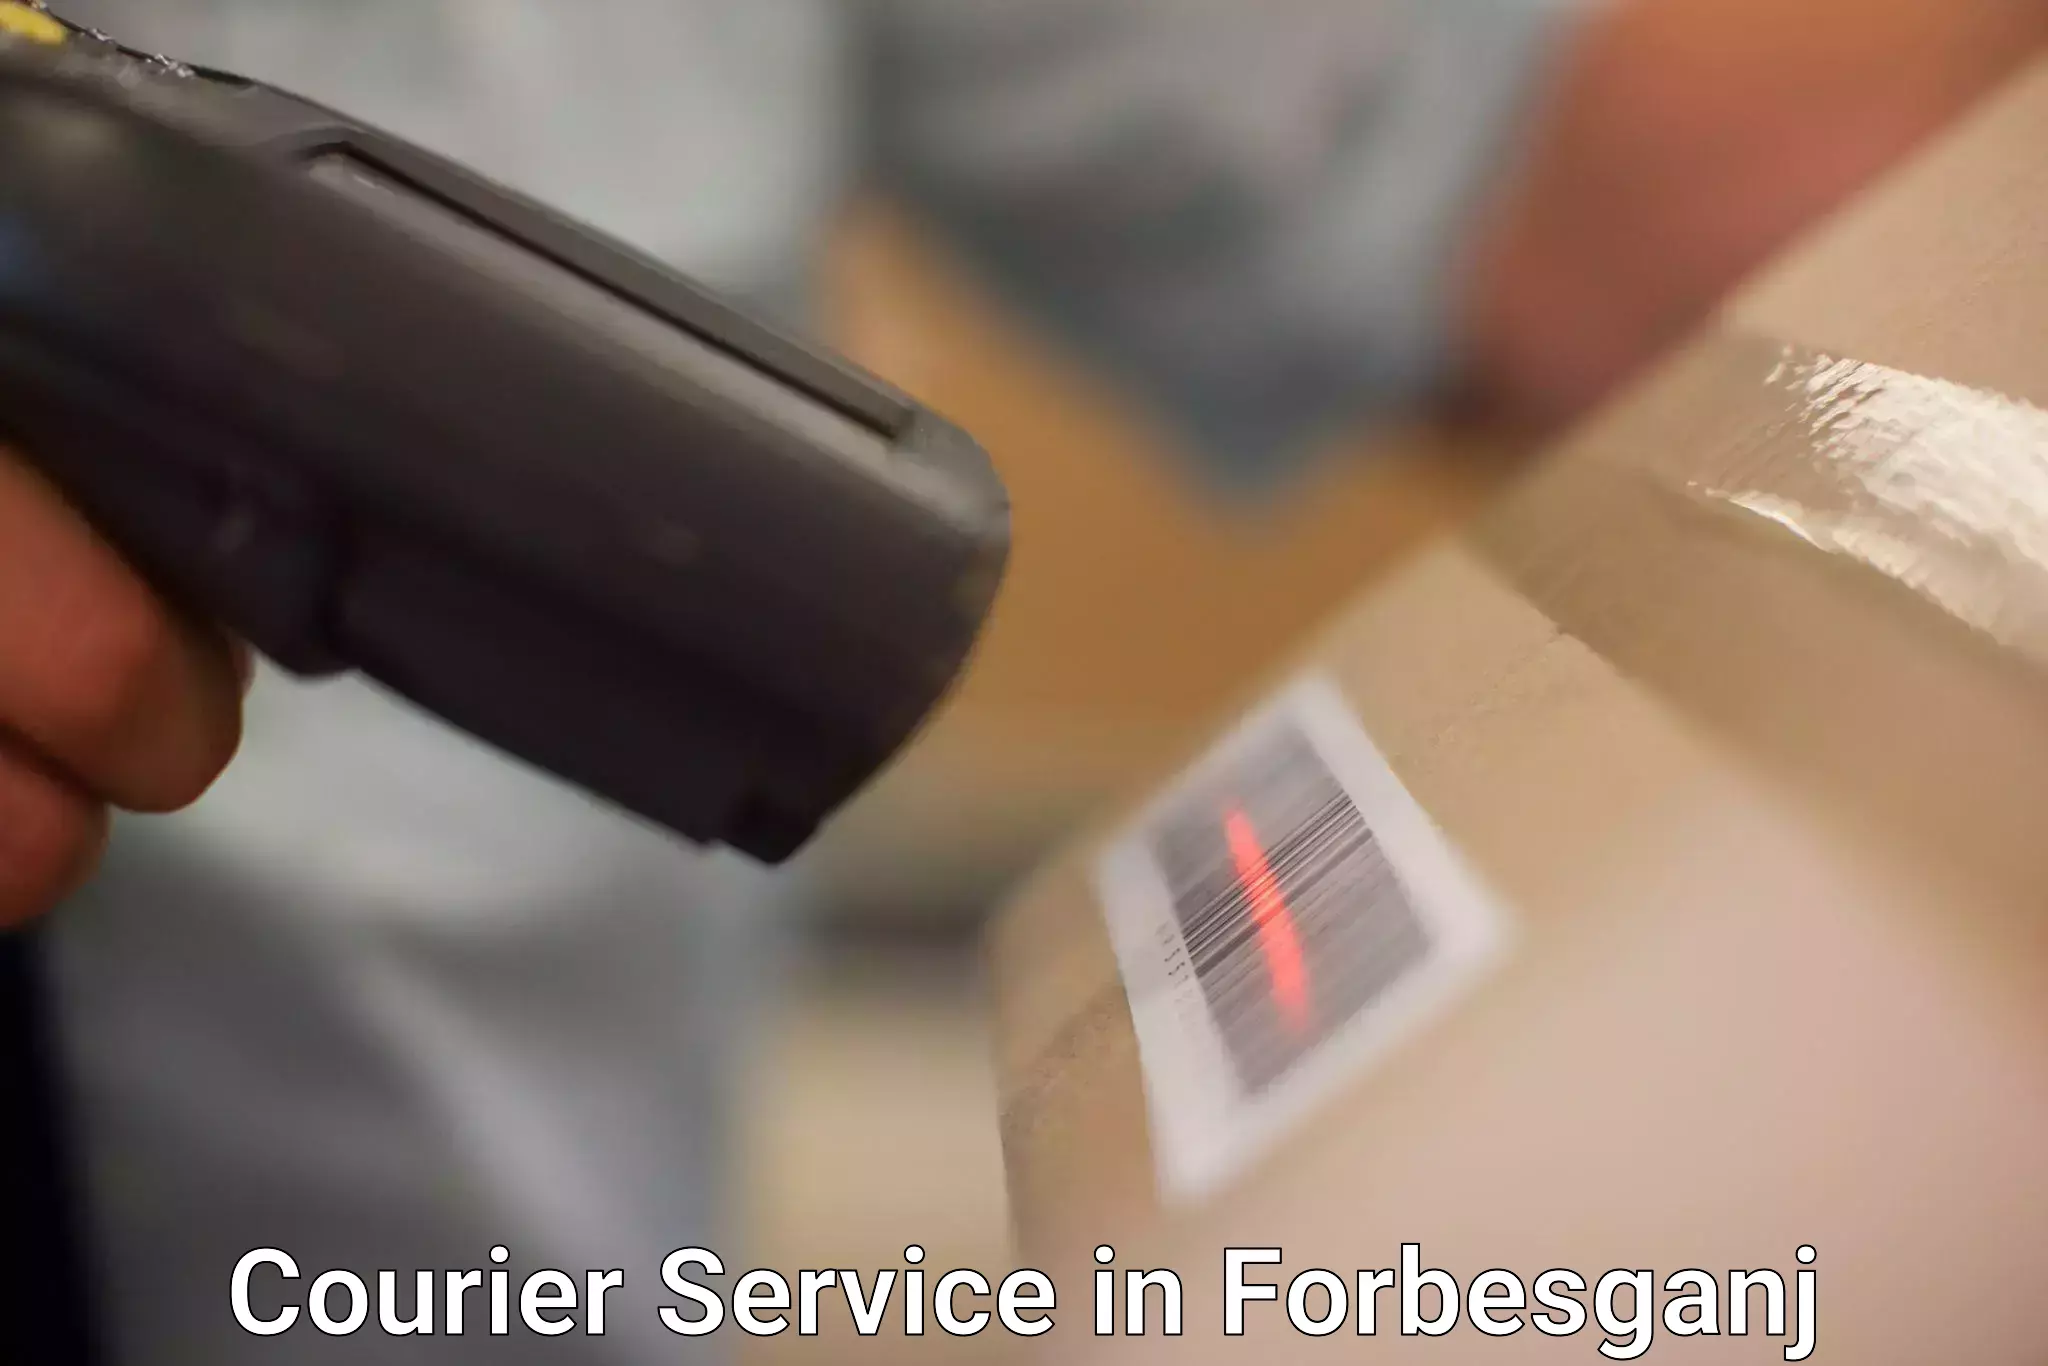 On-demand shipping options in Forbesganj